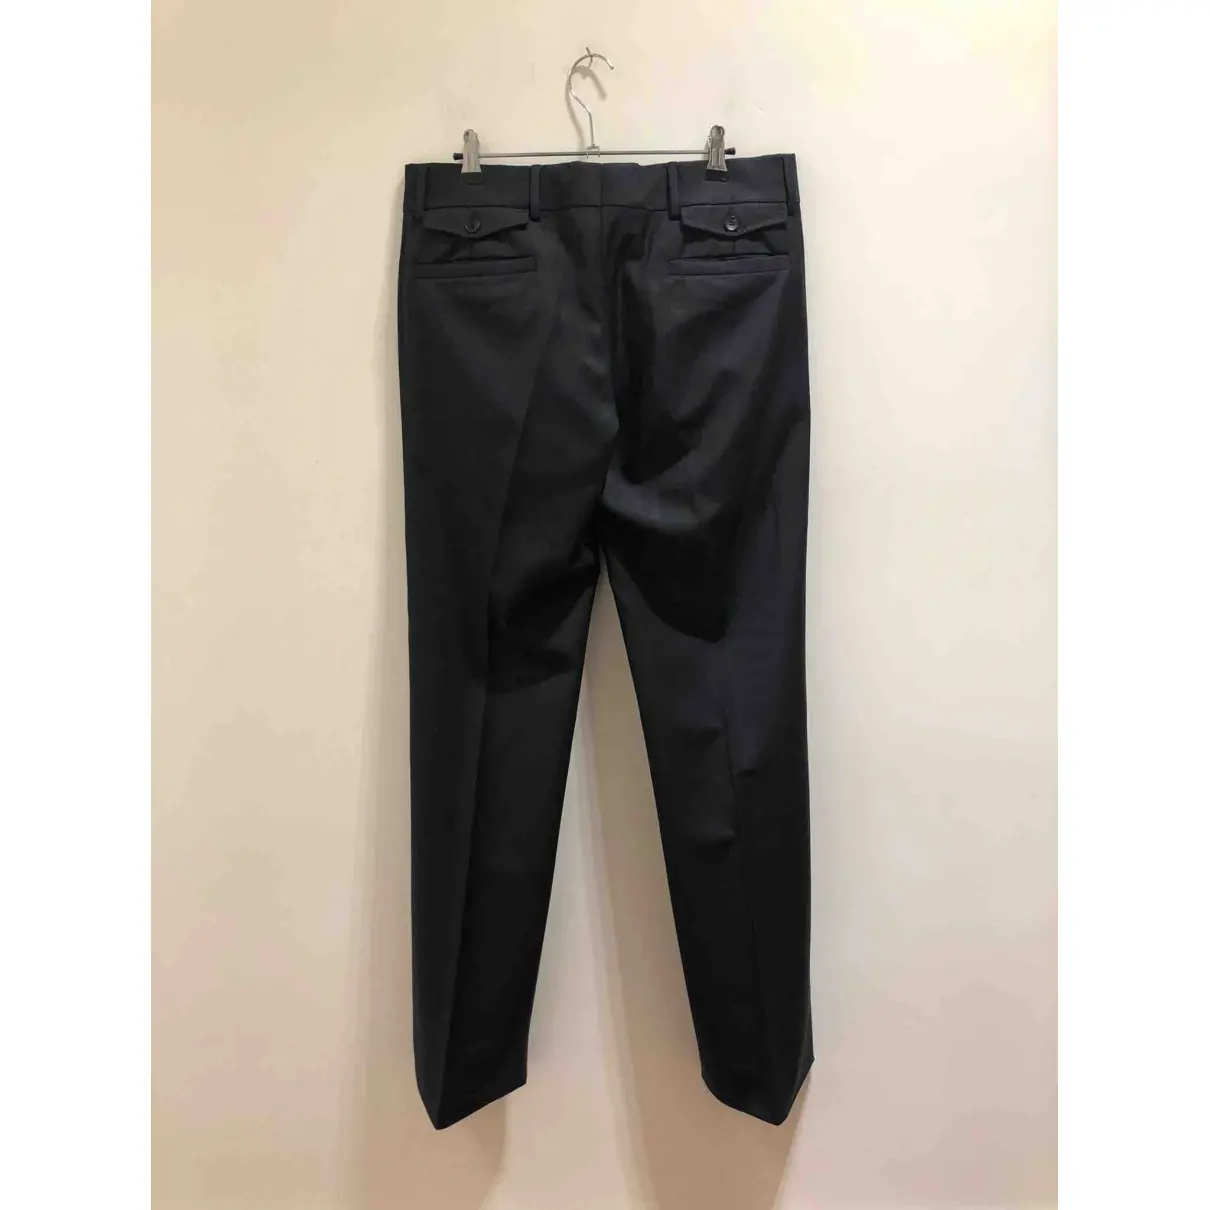 Buy Gucci Straight pants online - Vintage